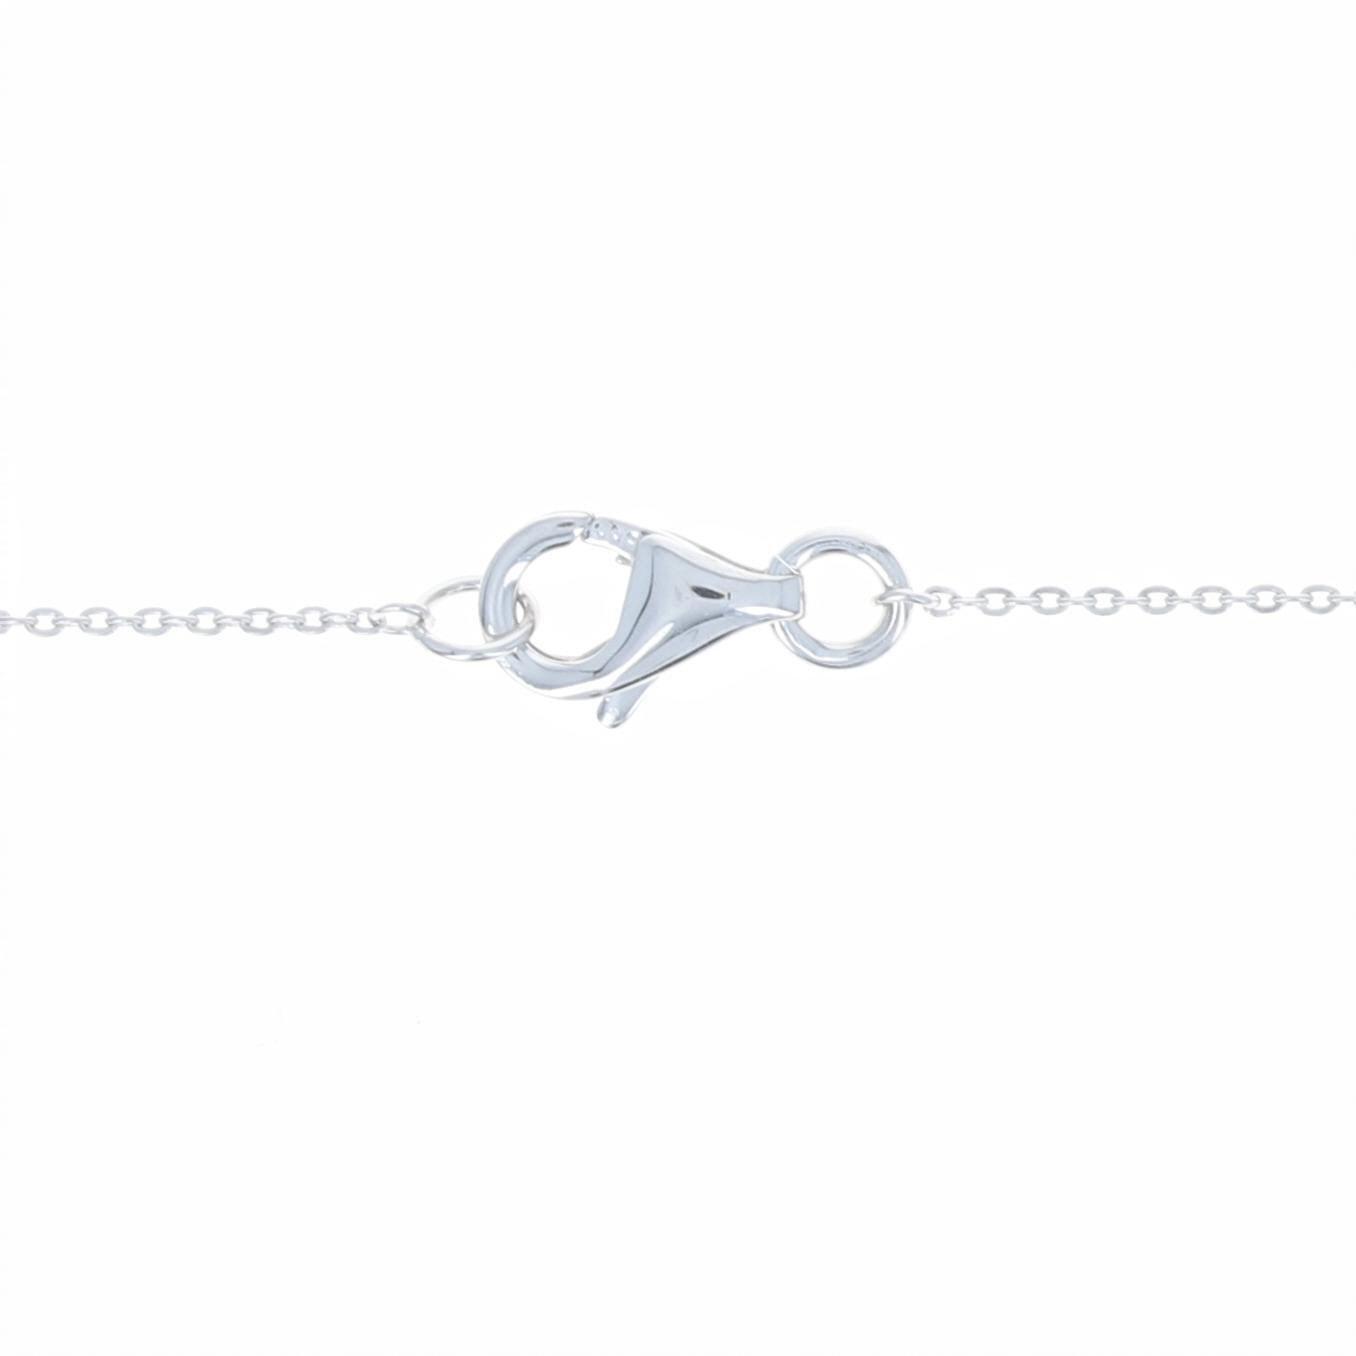 Women's White Gold Cable Chain Necklace, 14 Karat Lobster Claw Clasp Adjustable Length